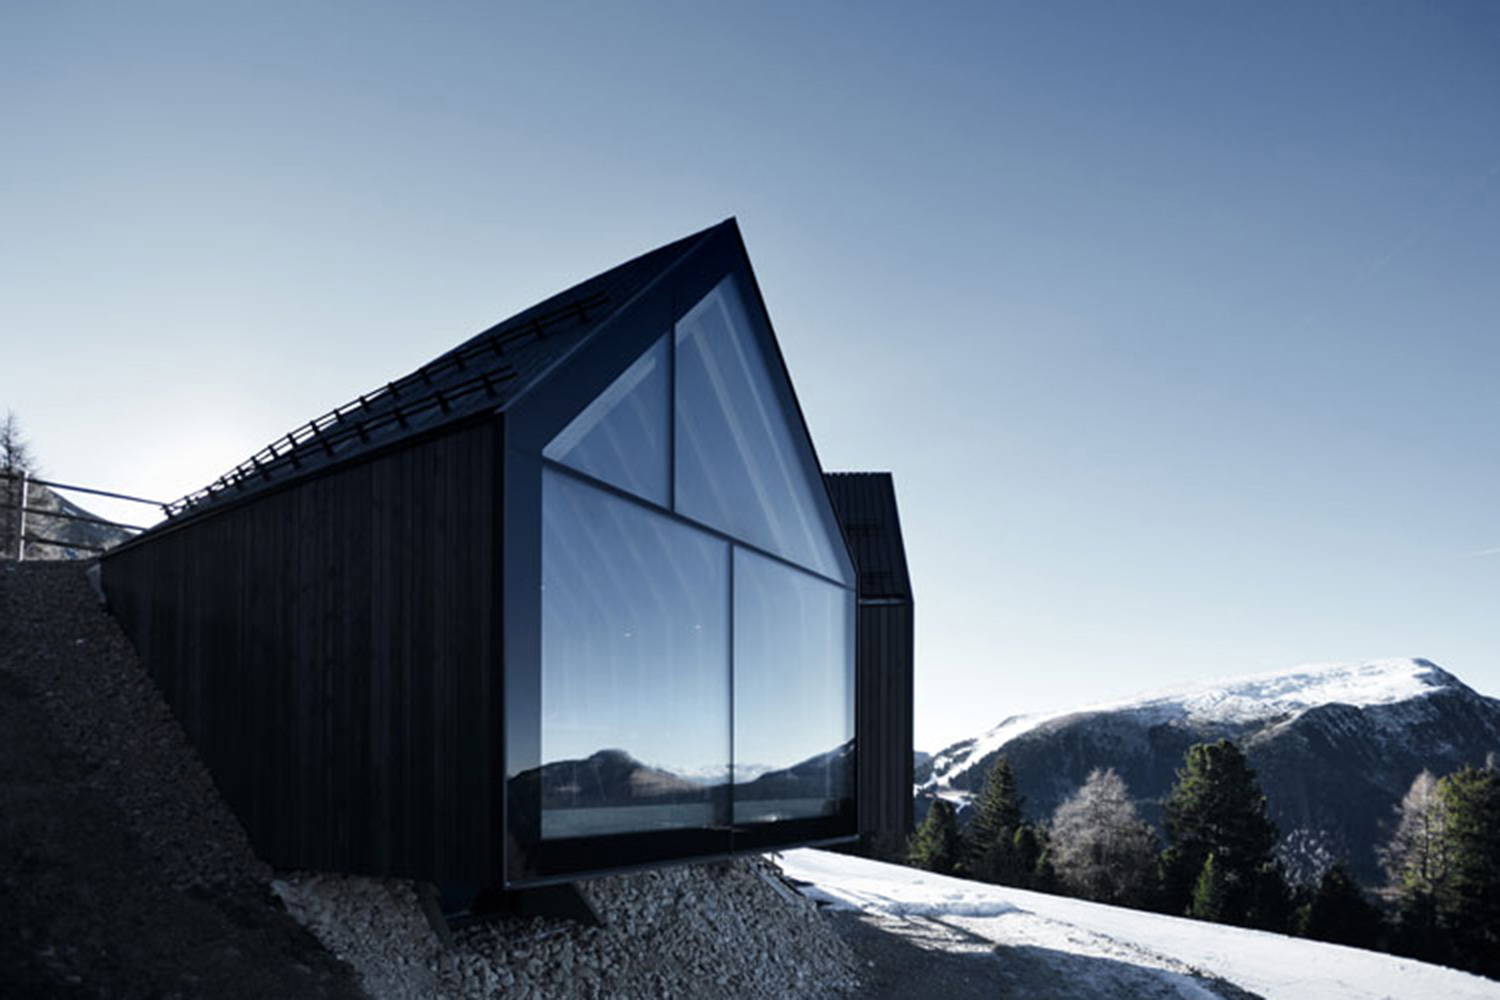 oberholz mountain hut italy peter pichler architecture 4